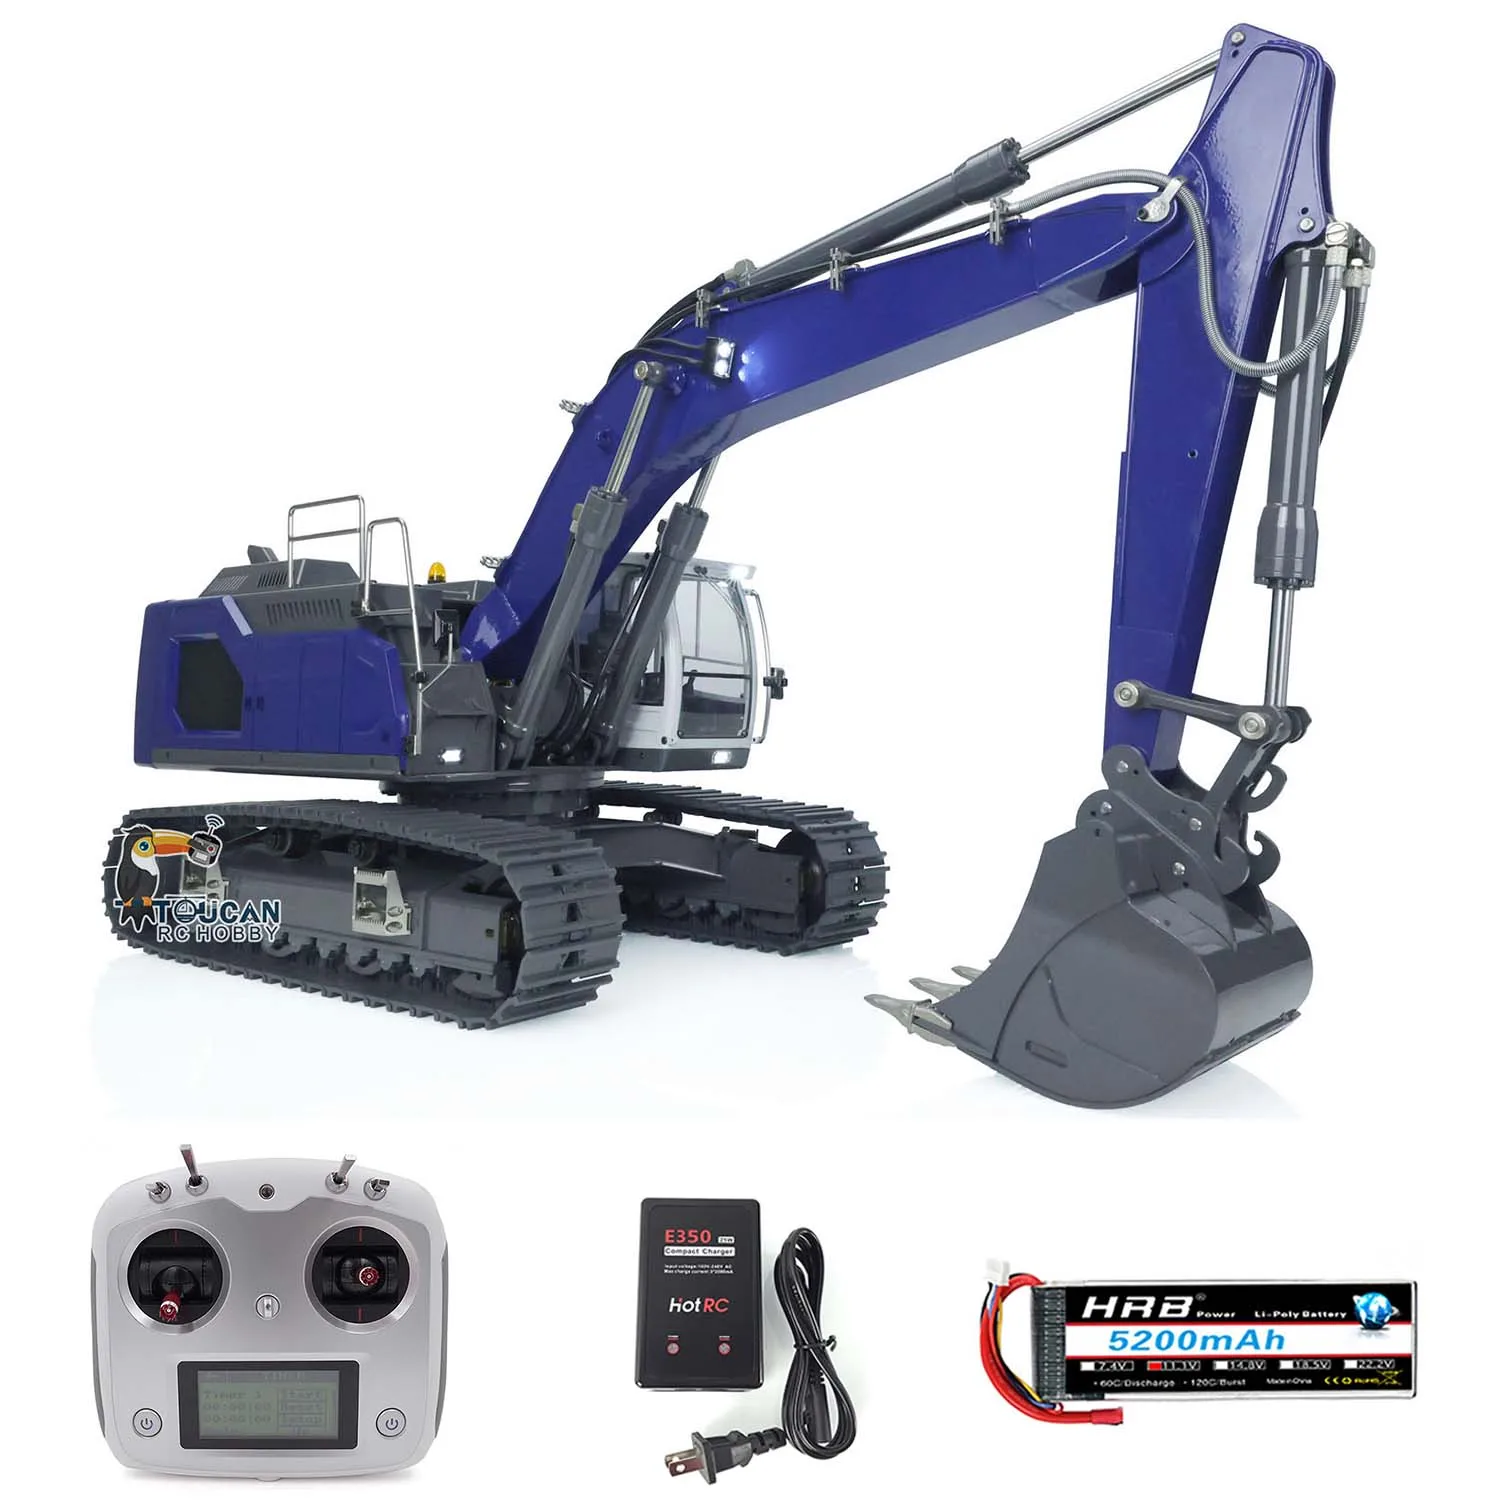 

XDRC 1/14 Hydraulic Excavator 945 RC Metal RTR Digger Truck Model With Light Battery Remote Control Light System Bucket THZH1436